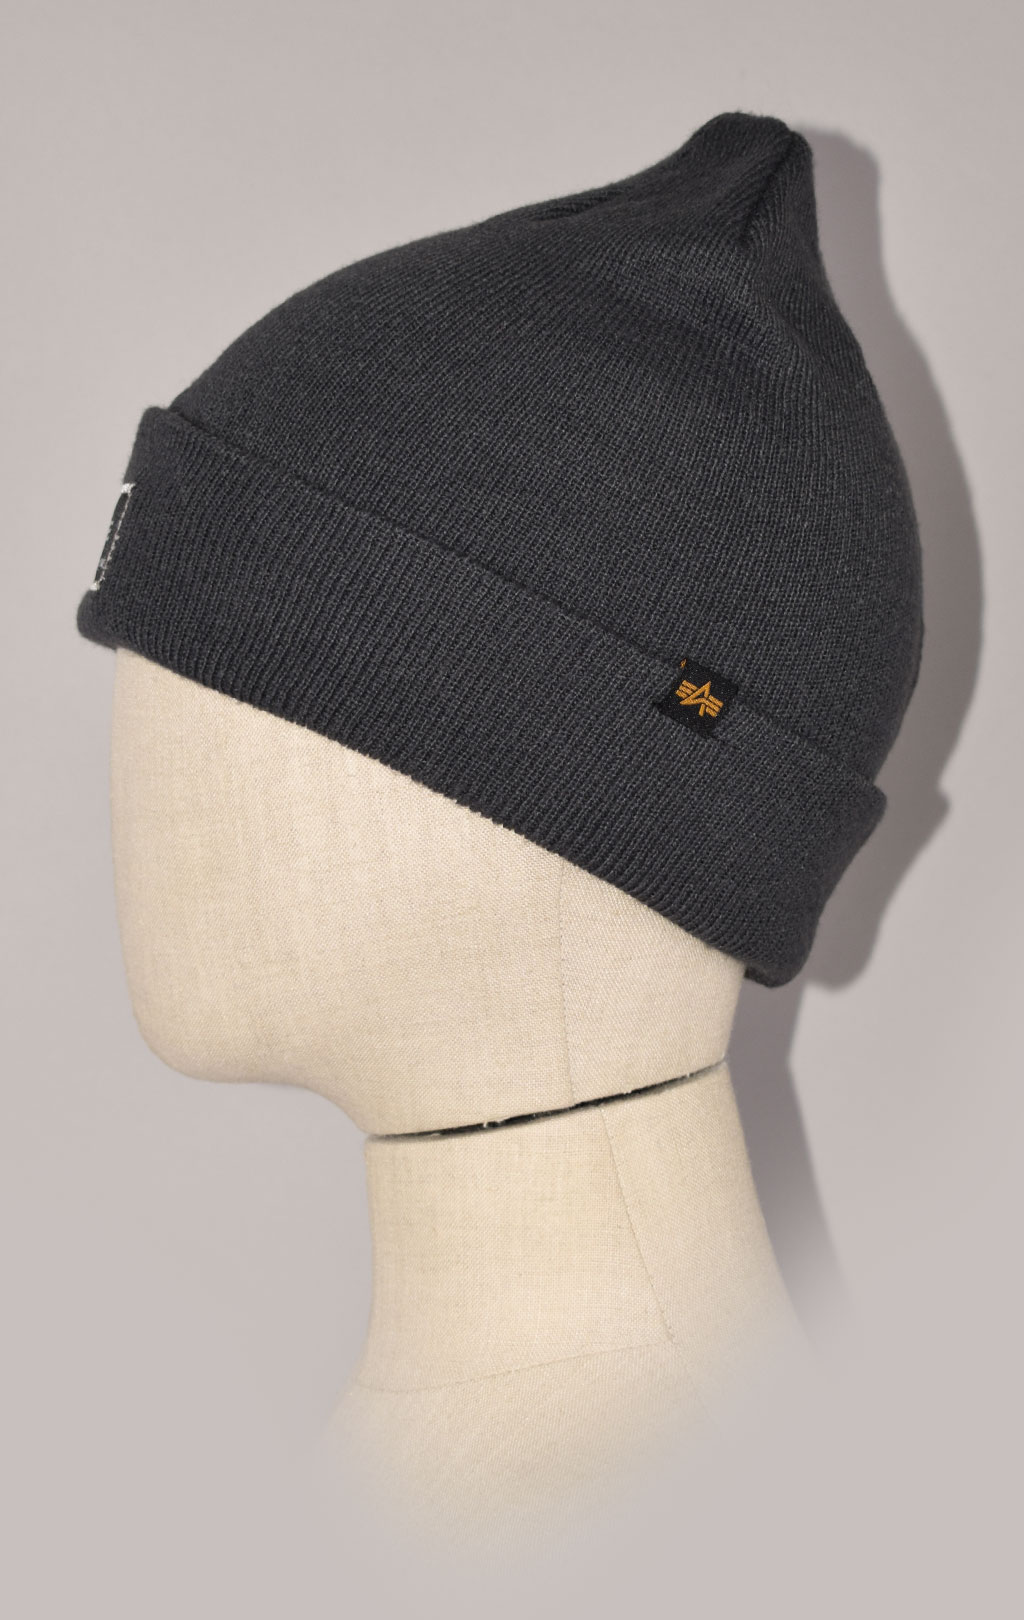 Шапка ALPHA INDUSTRIES X-FIT BEANIE rep. grey 